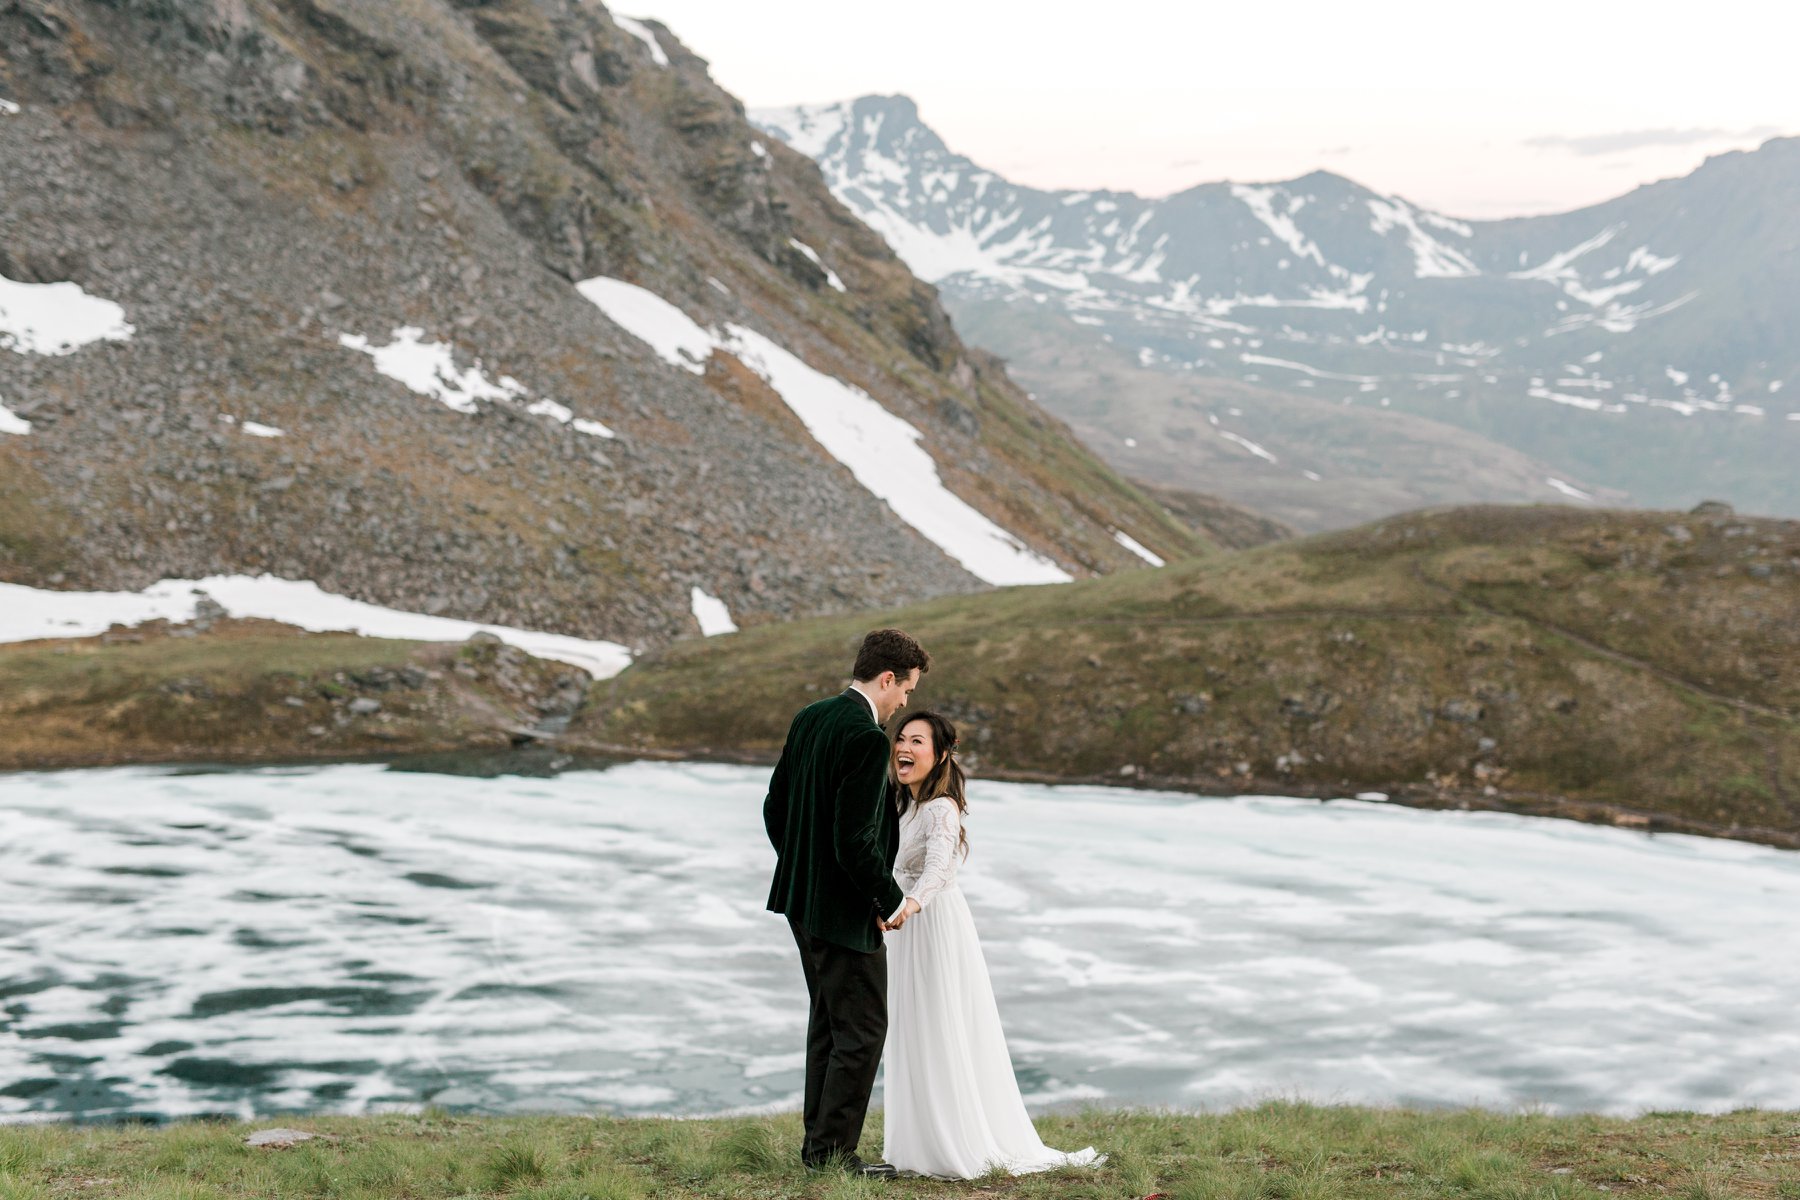 Bride and groom smiling in icy landscape